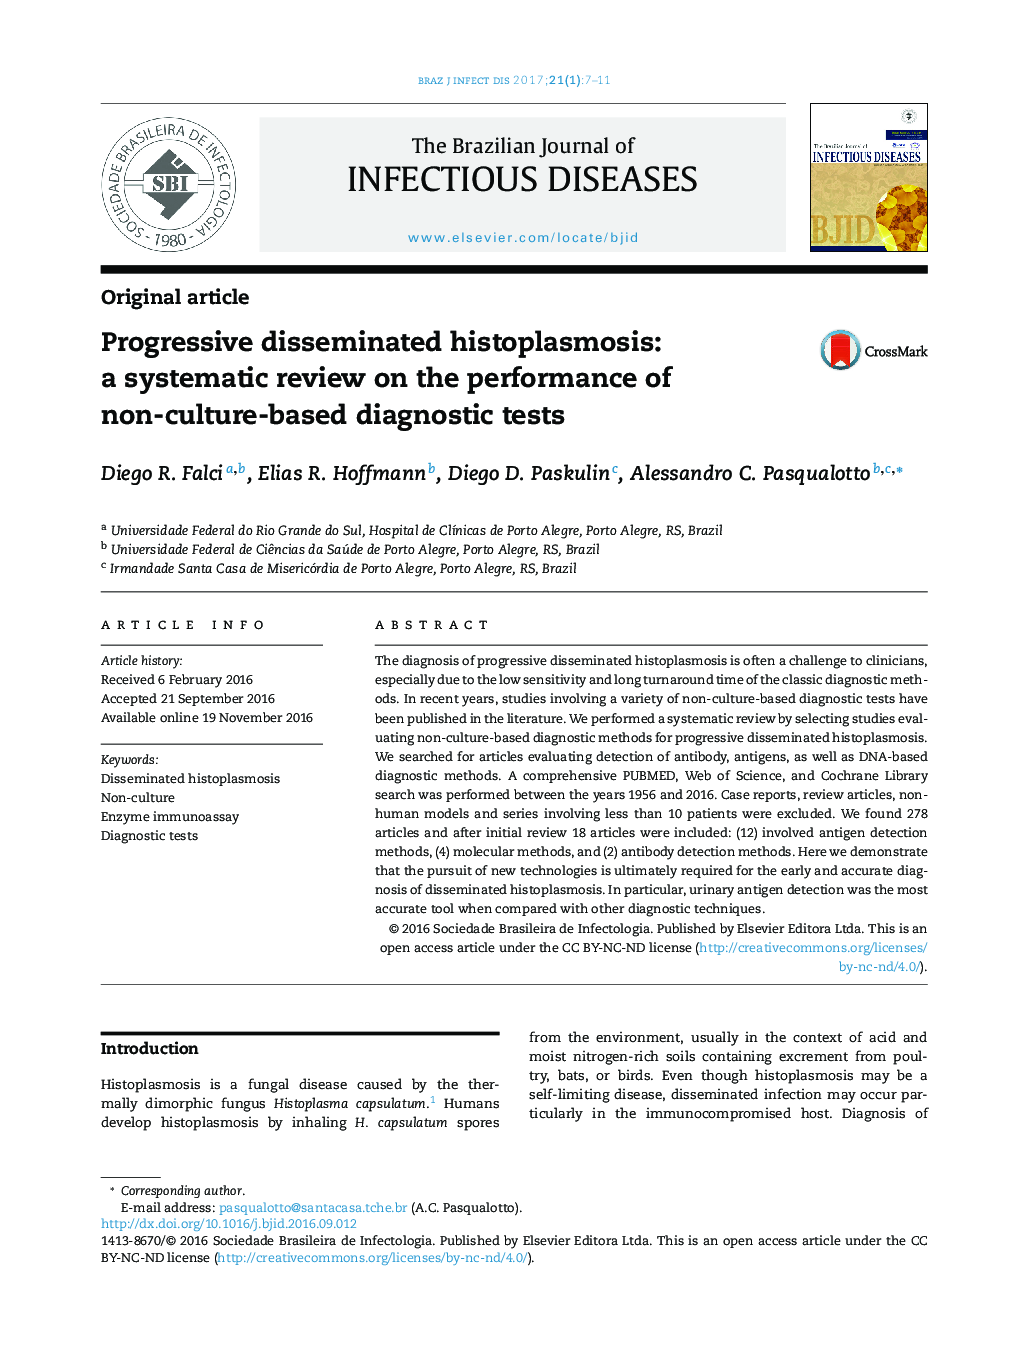 Progressive disseminated histoplasmosis: a systematic review on the performance of non-culture-based diagnostic tests